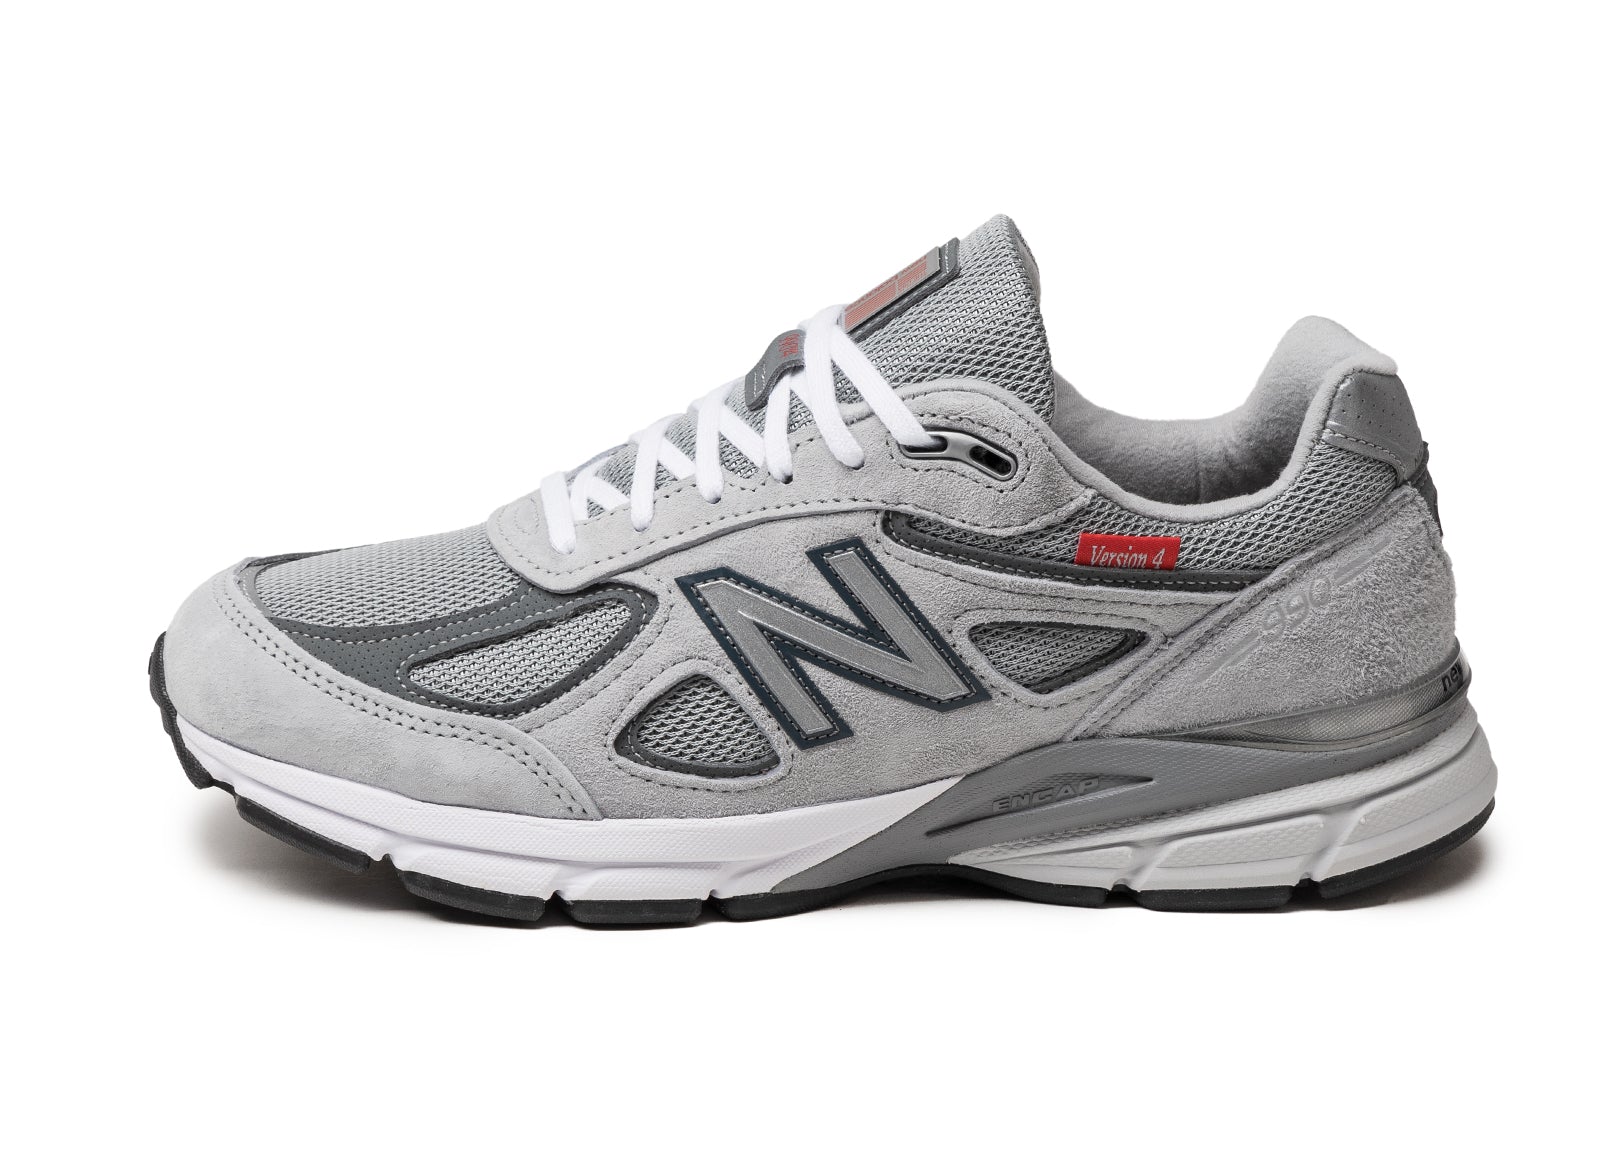 New Balance M 990 VS4
« Made in USA »